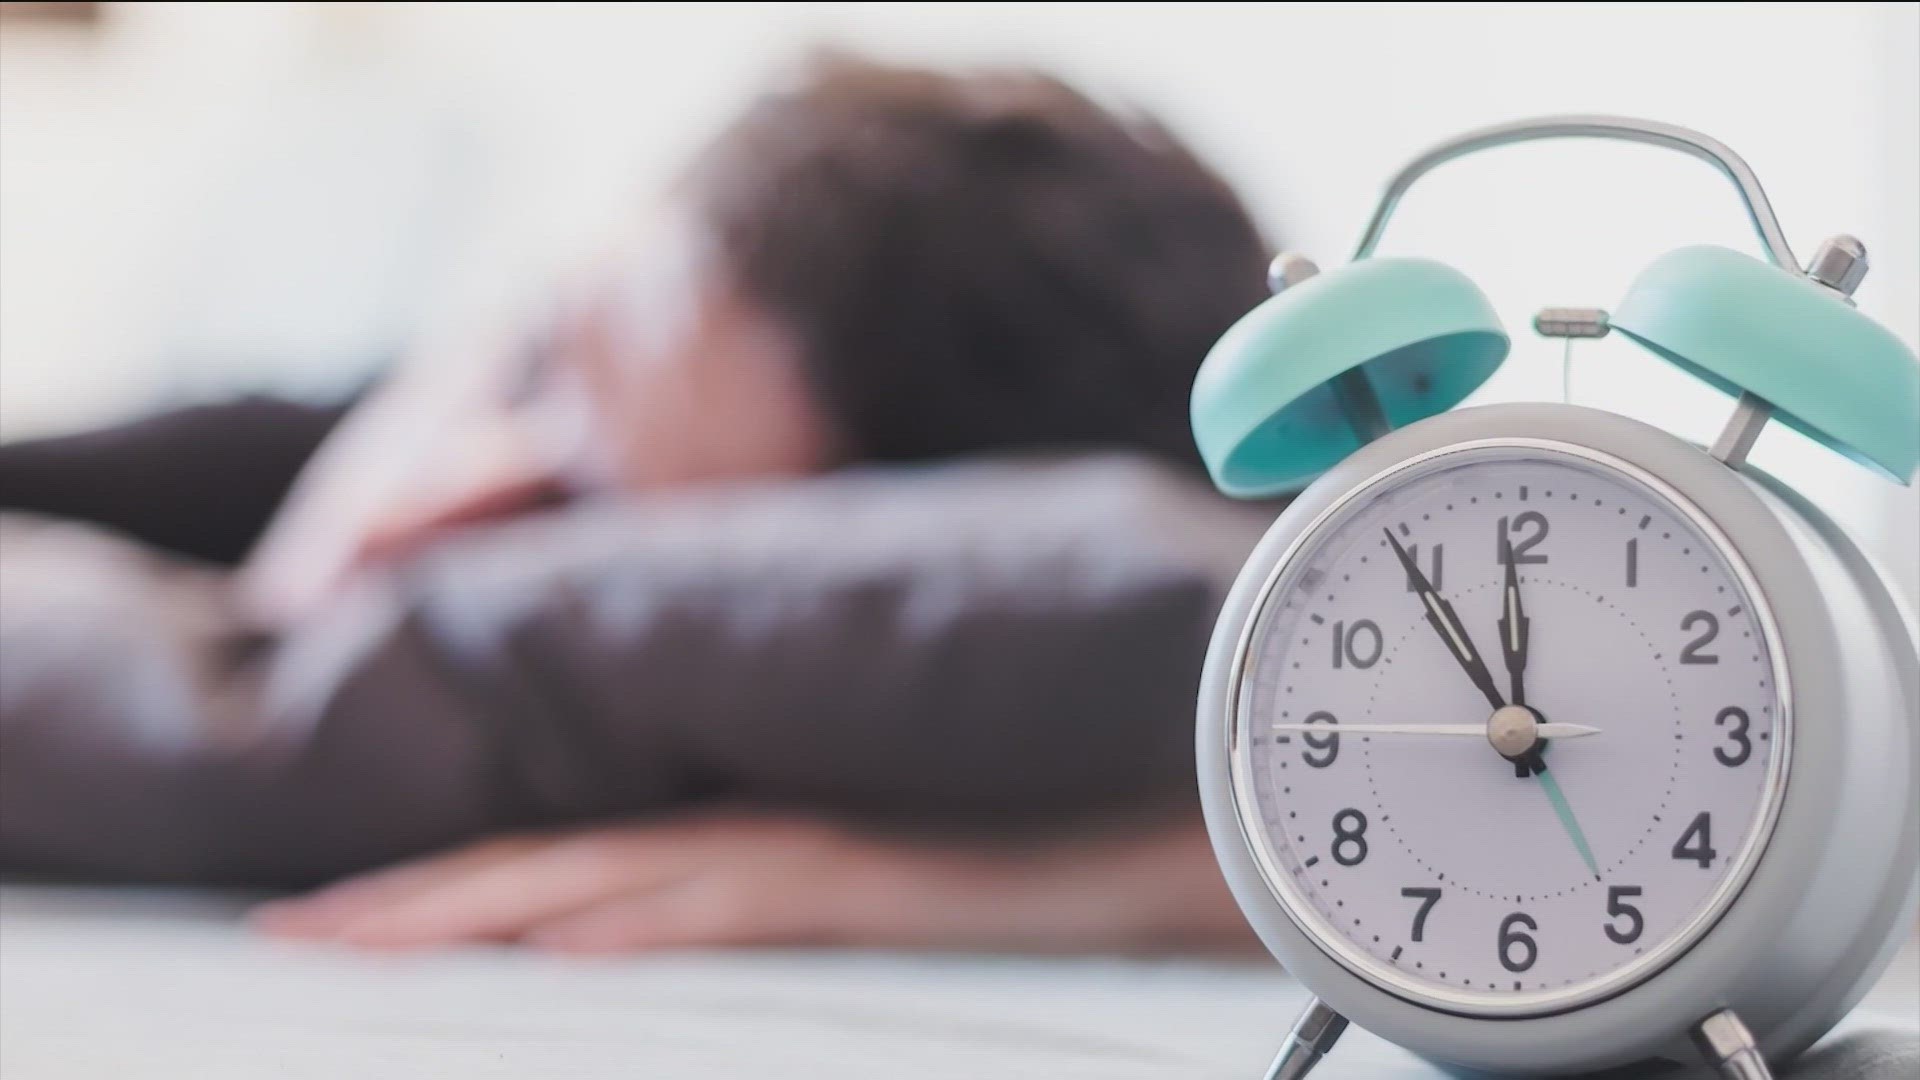 This legislation, supported by the California Medical Association, would eliminate Daylight saving time. It's a move that not all San Diegans are in favor of.